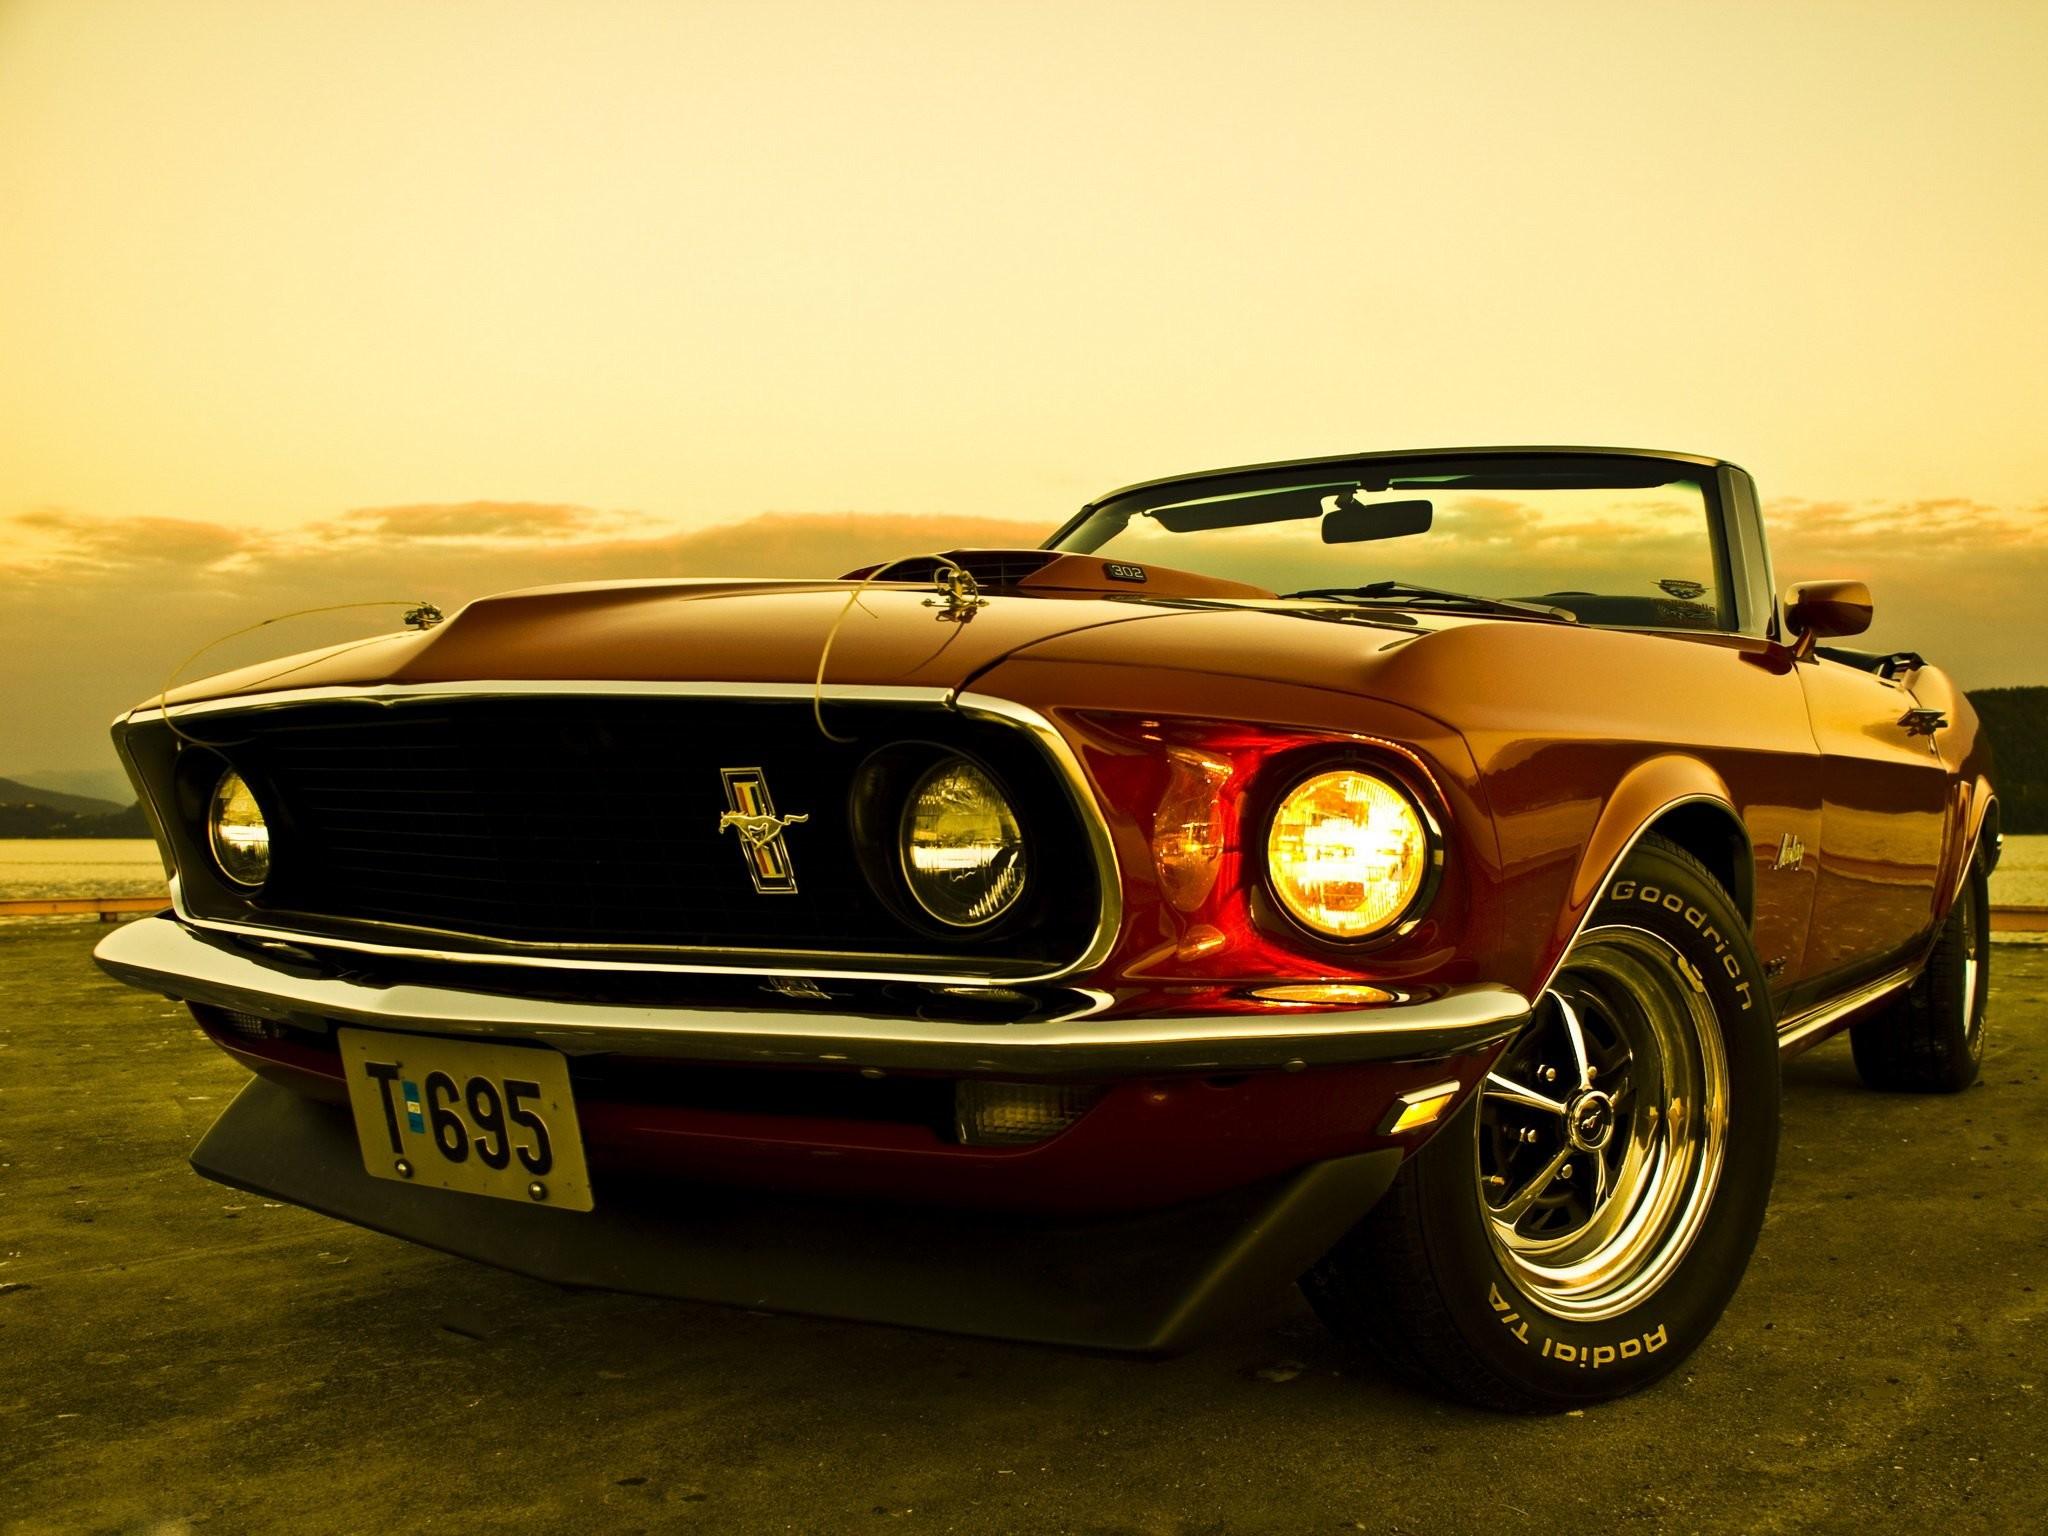 Classic Mustang Wallpaper , Find HD Wallpaper For Free